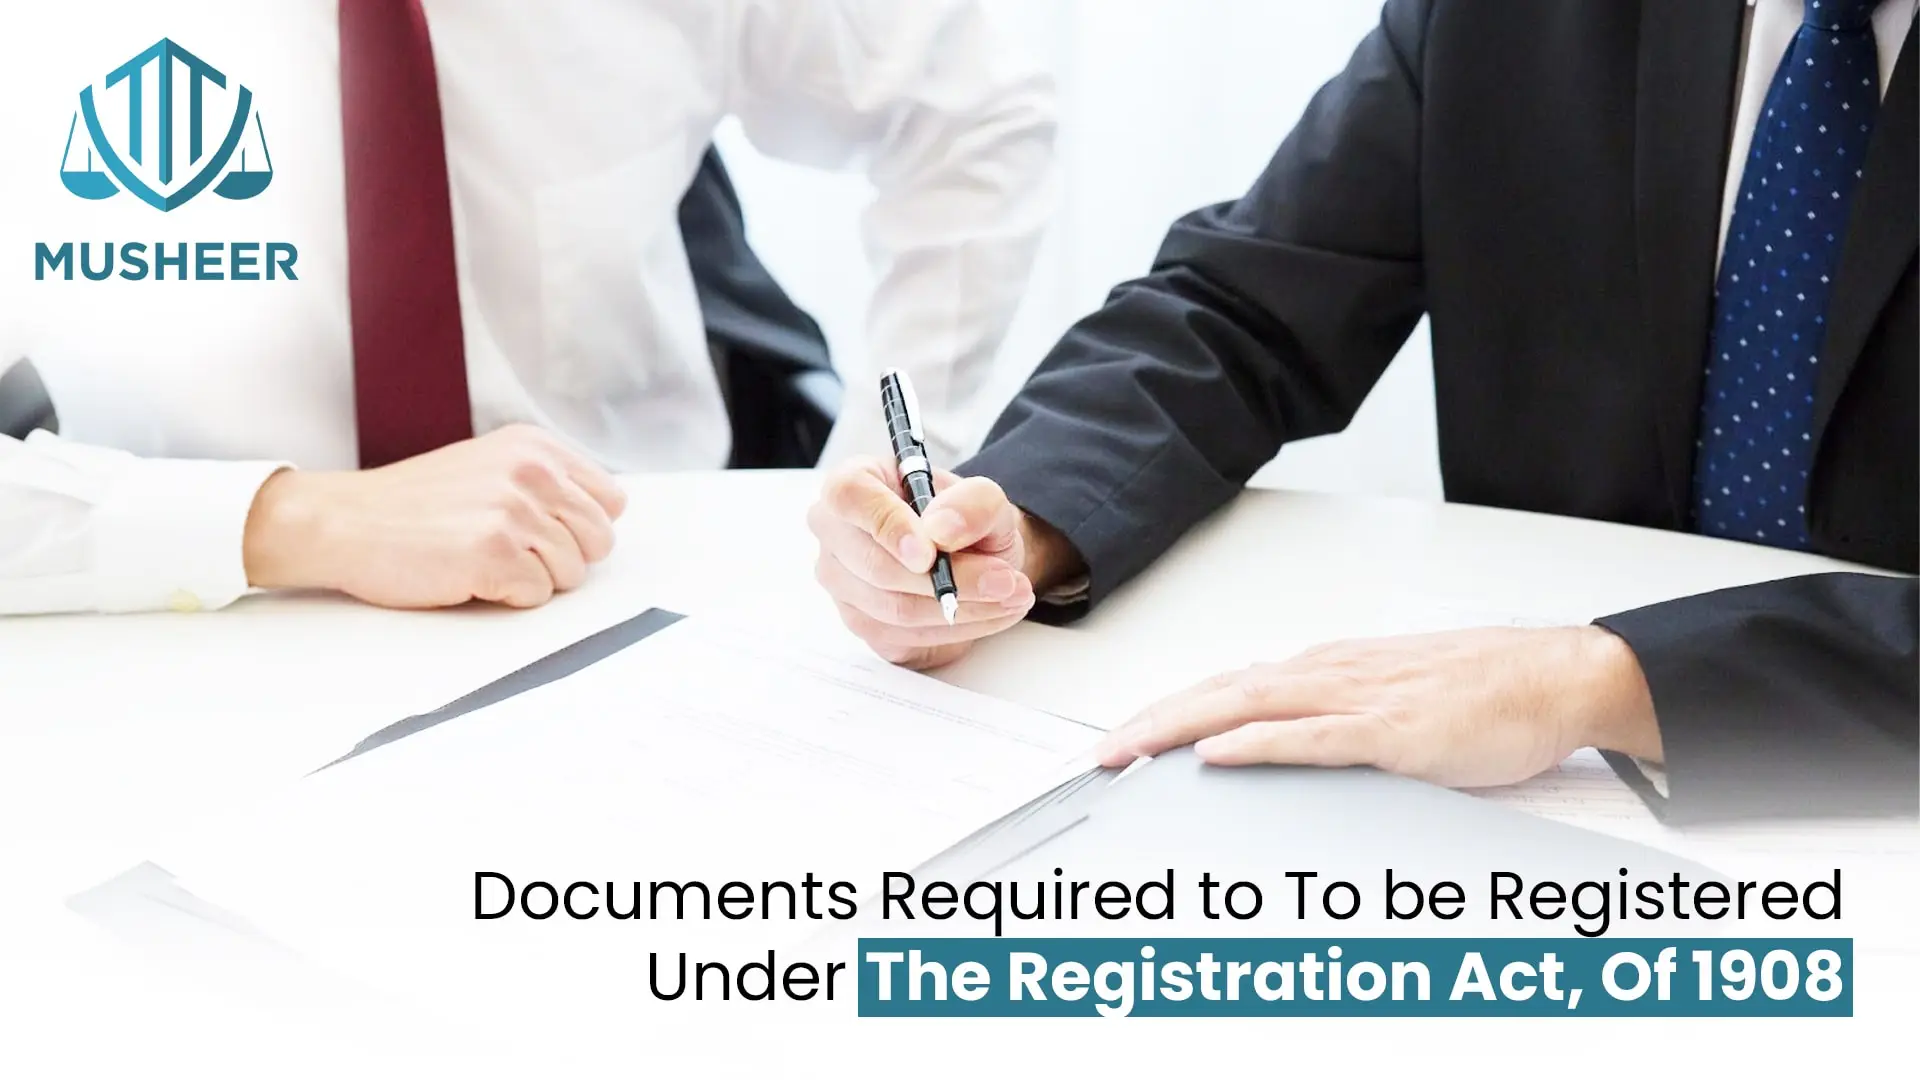 What documents are required for registration under the Registration Act, 1908